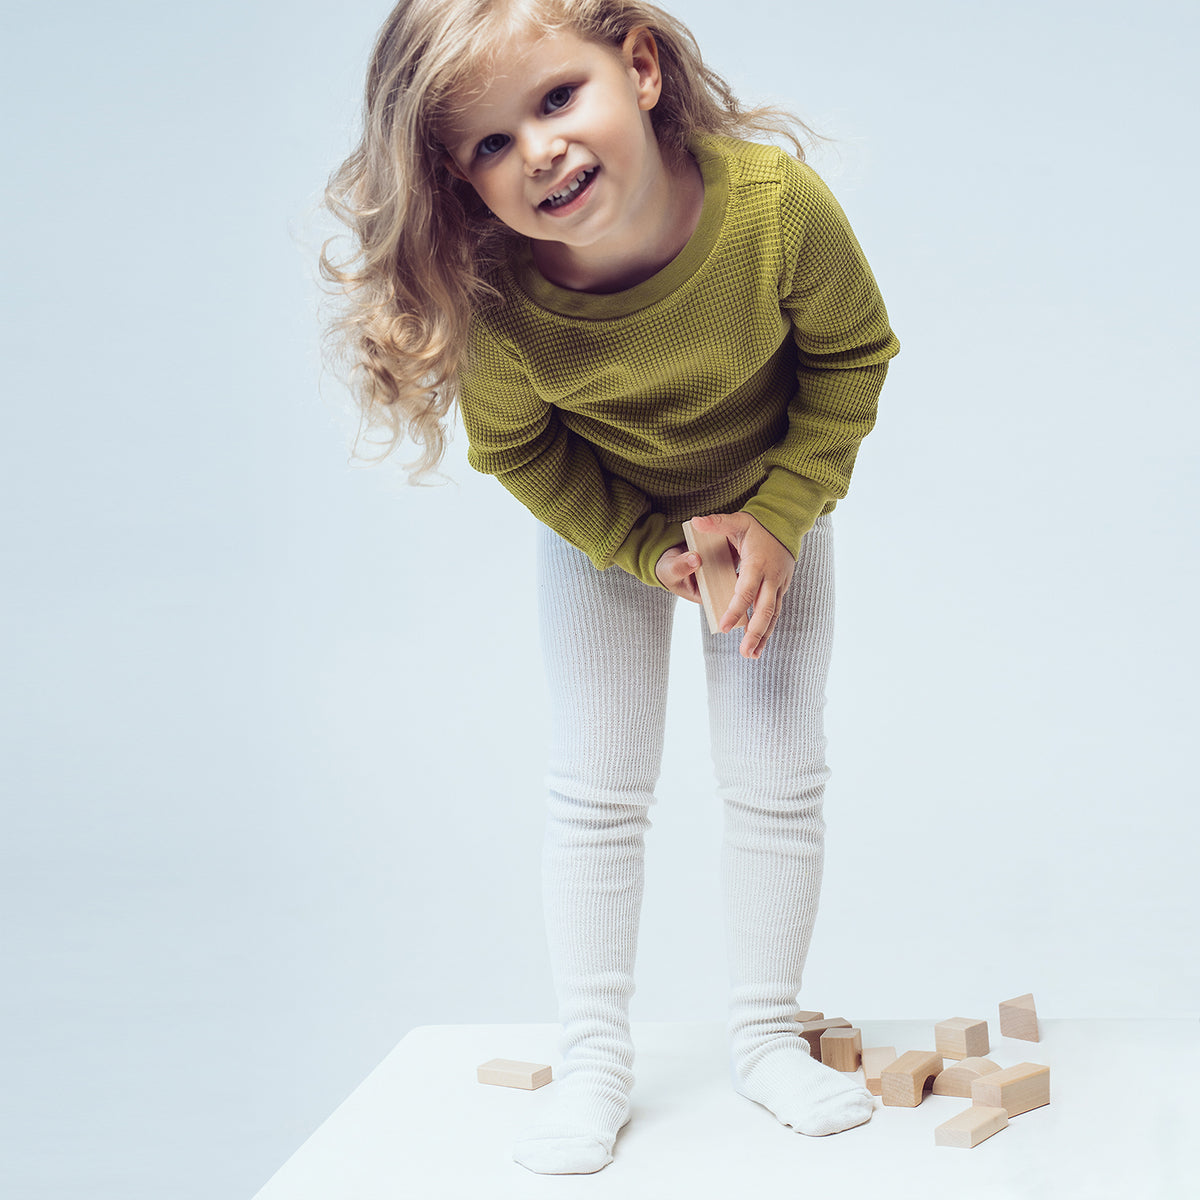 PEQNE Footed Children Tights in Cream White